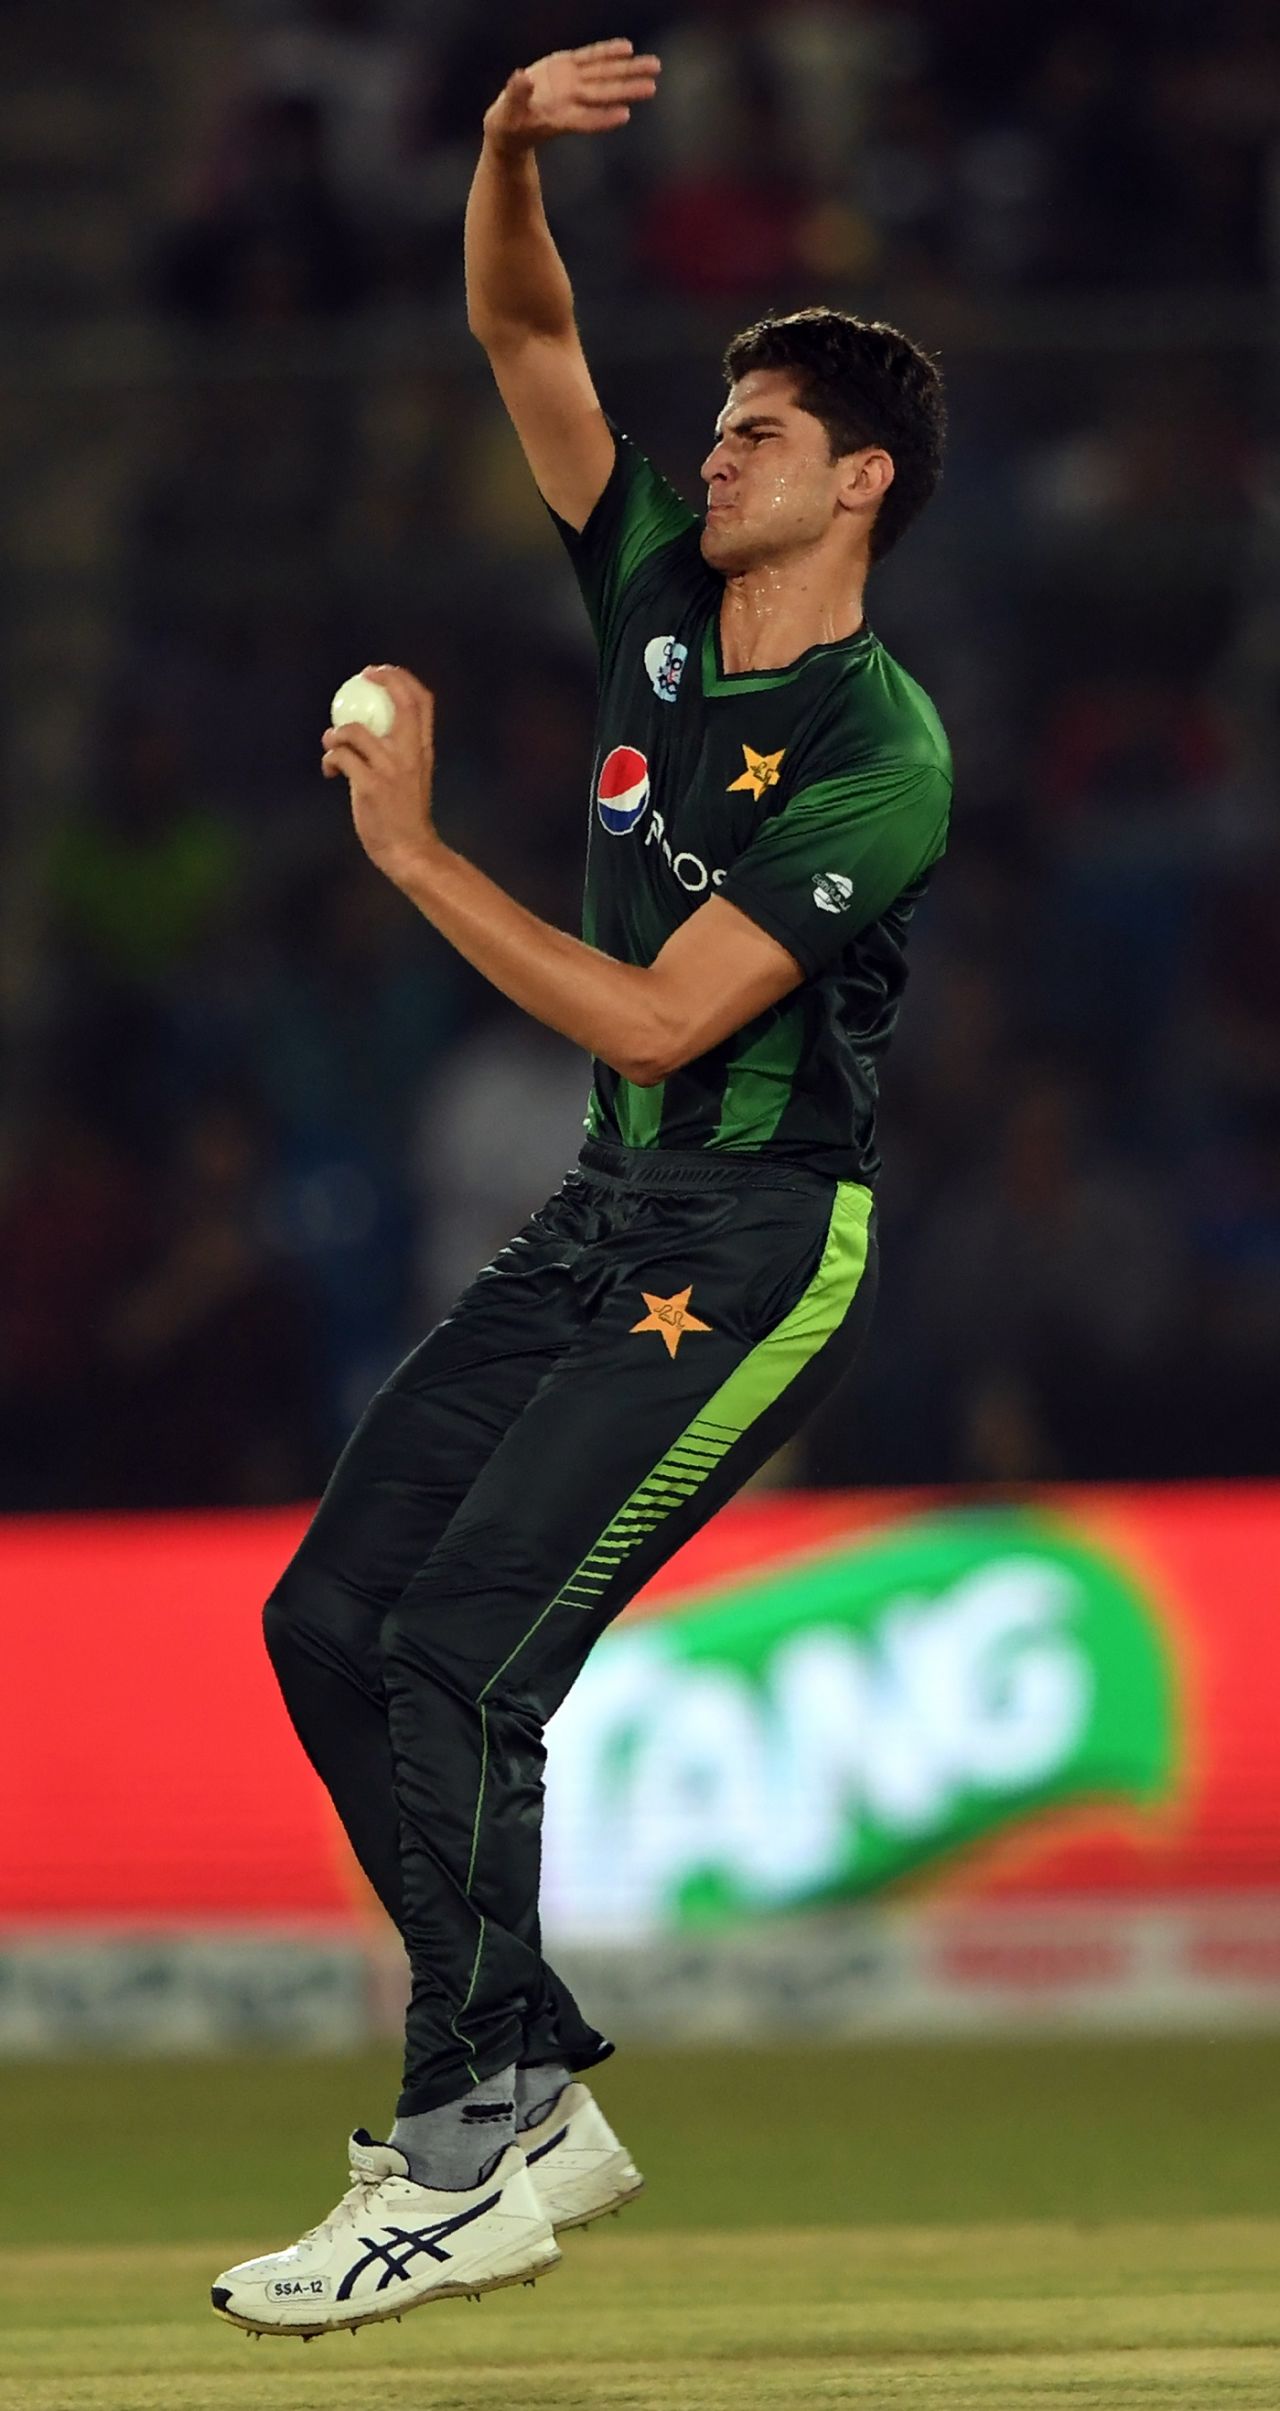 Shaheen Afridi in his delivery stride, Pakistan v West Indies, 3rd T20I, Karachi, April 3, 2018